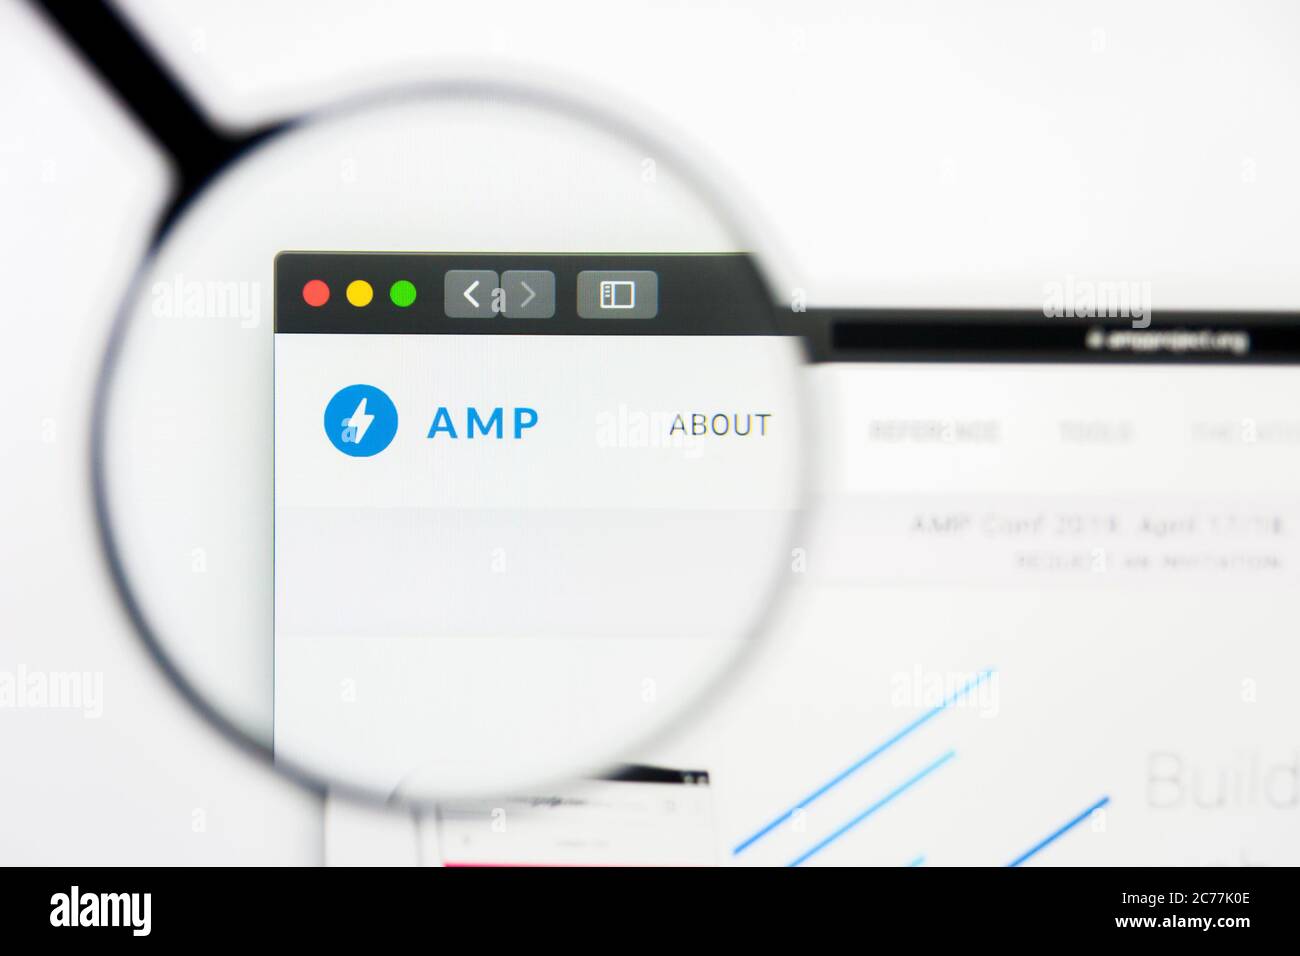 Los Angeles, California, USA - 23 March 2019: Illustrative Editorial of AMP website homepage. AMP logo visible on display screen. Stock Photo